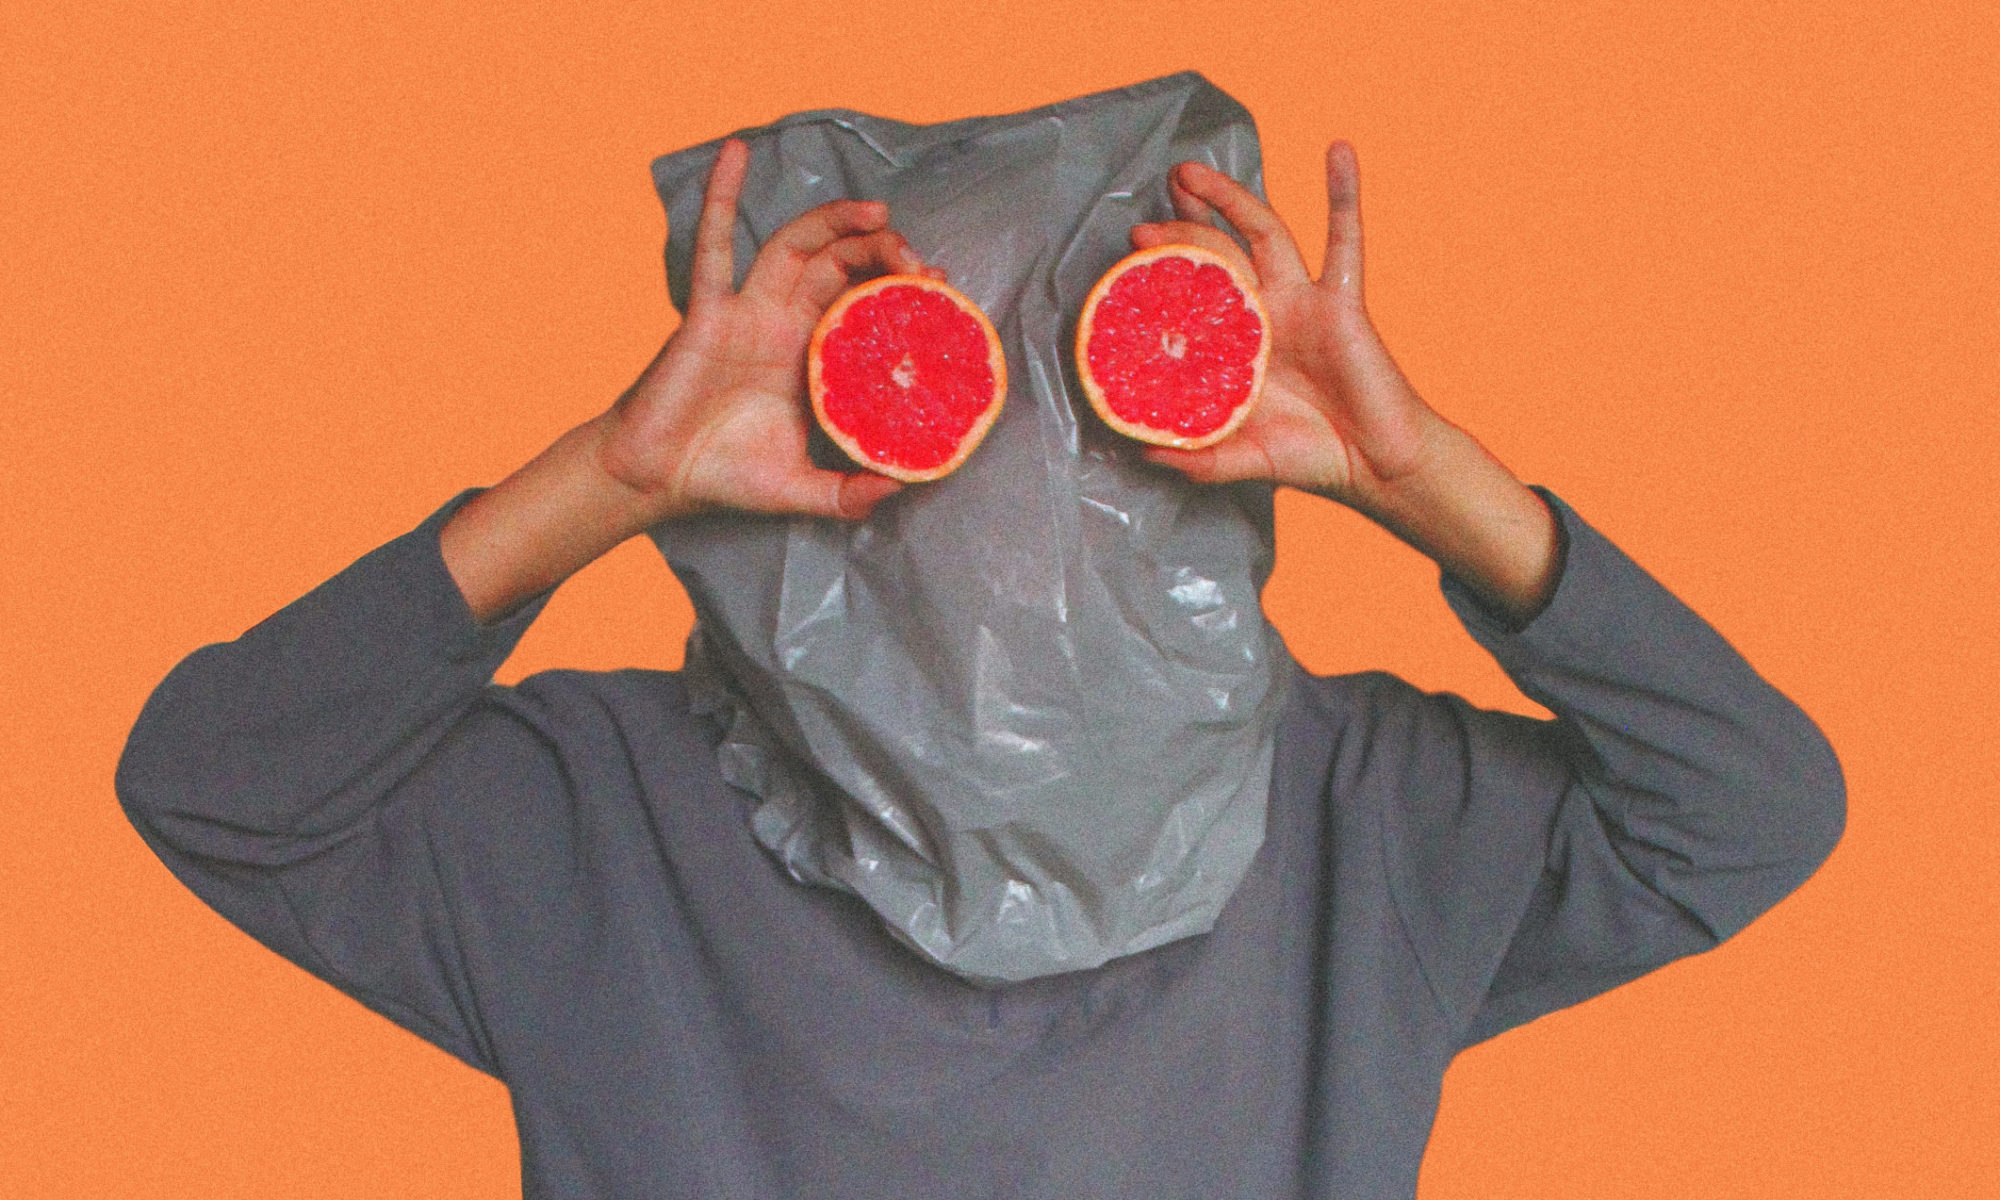 Person covered with plastic bag on head while holding sliced blood orange